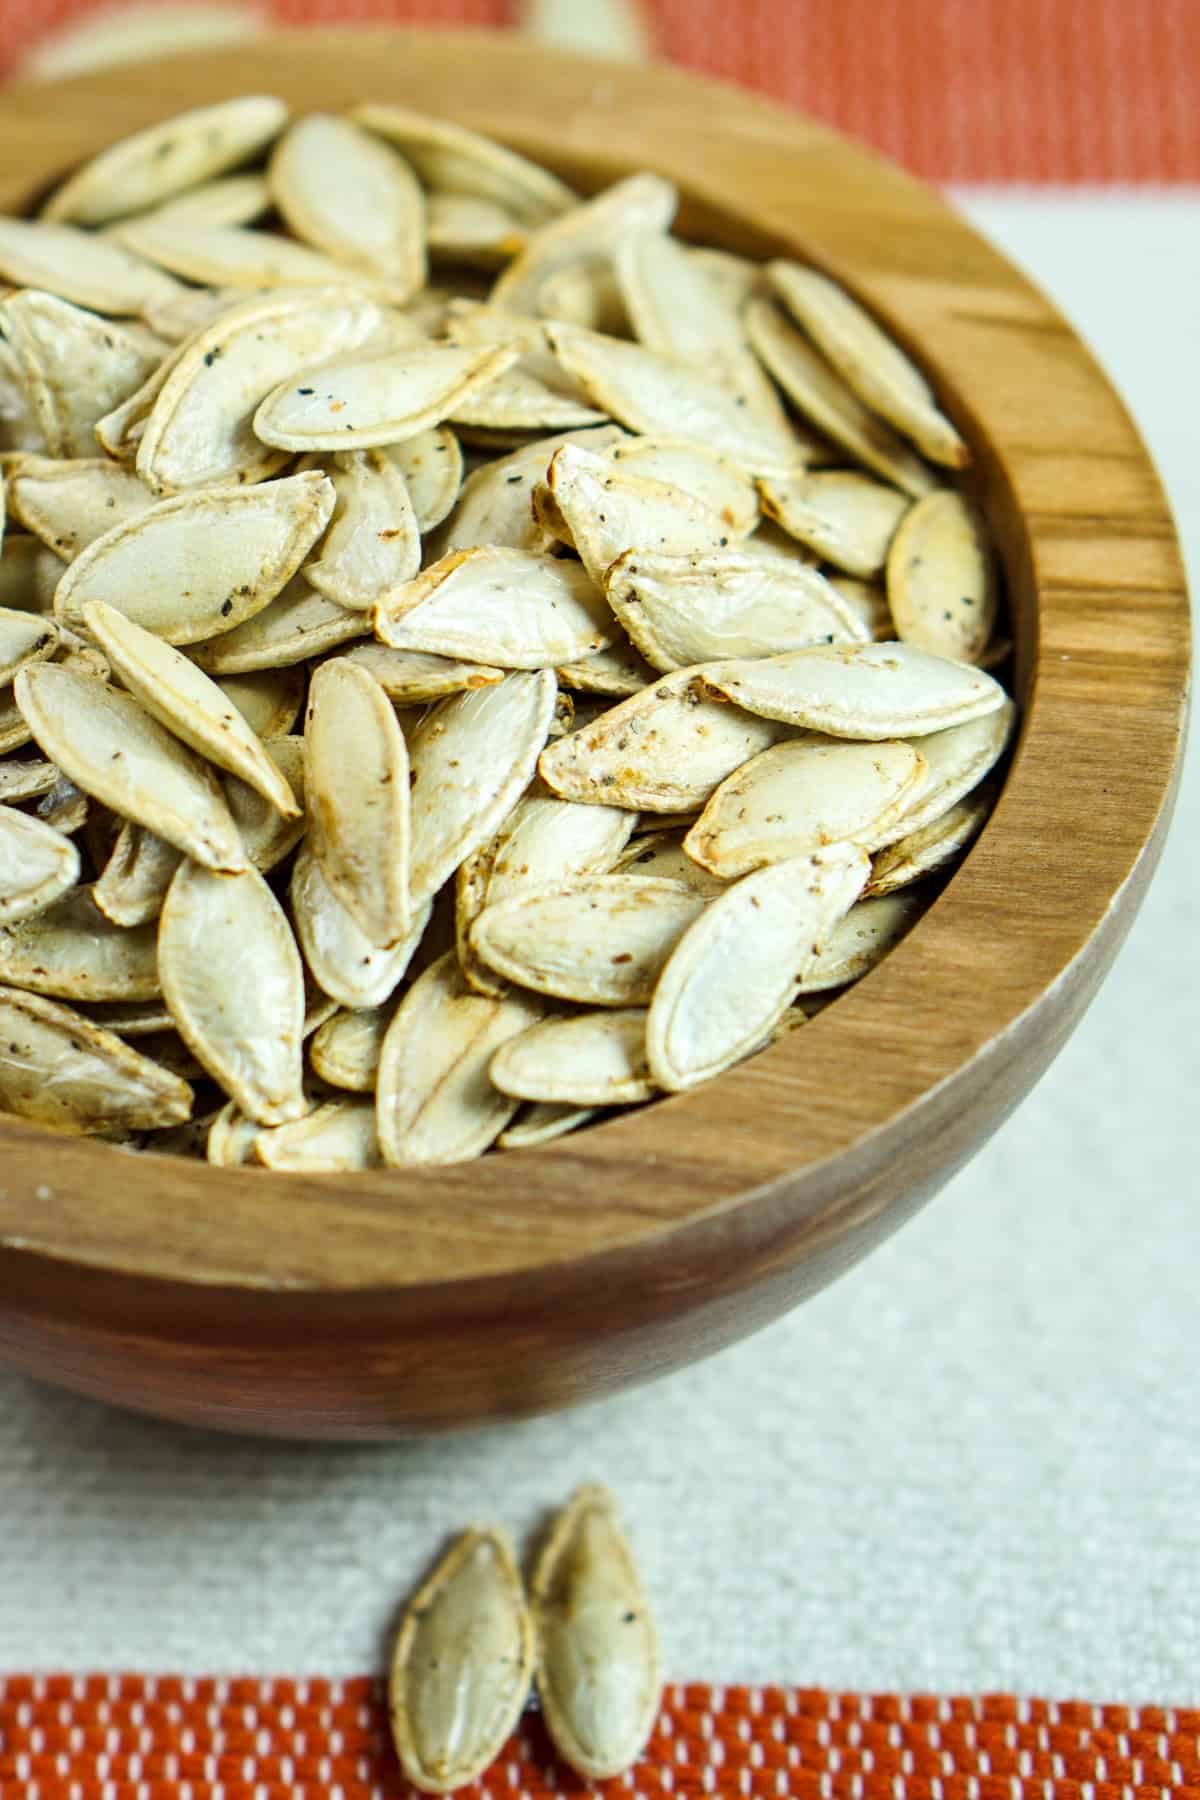 This toasted salted pumpkin seeds recipe is ridiculously easy. Wash & strain, season, dry and roast for deliciously crisp seeds. Then crunch away and enjoy!